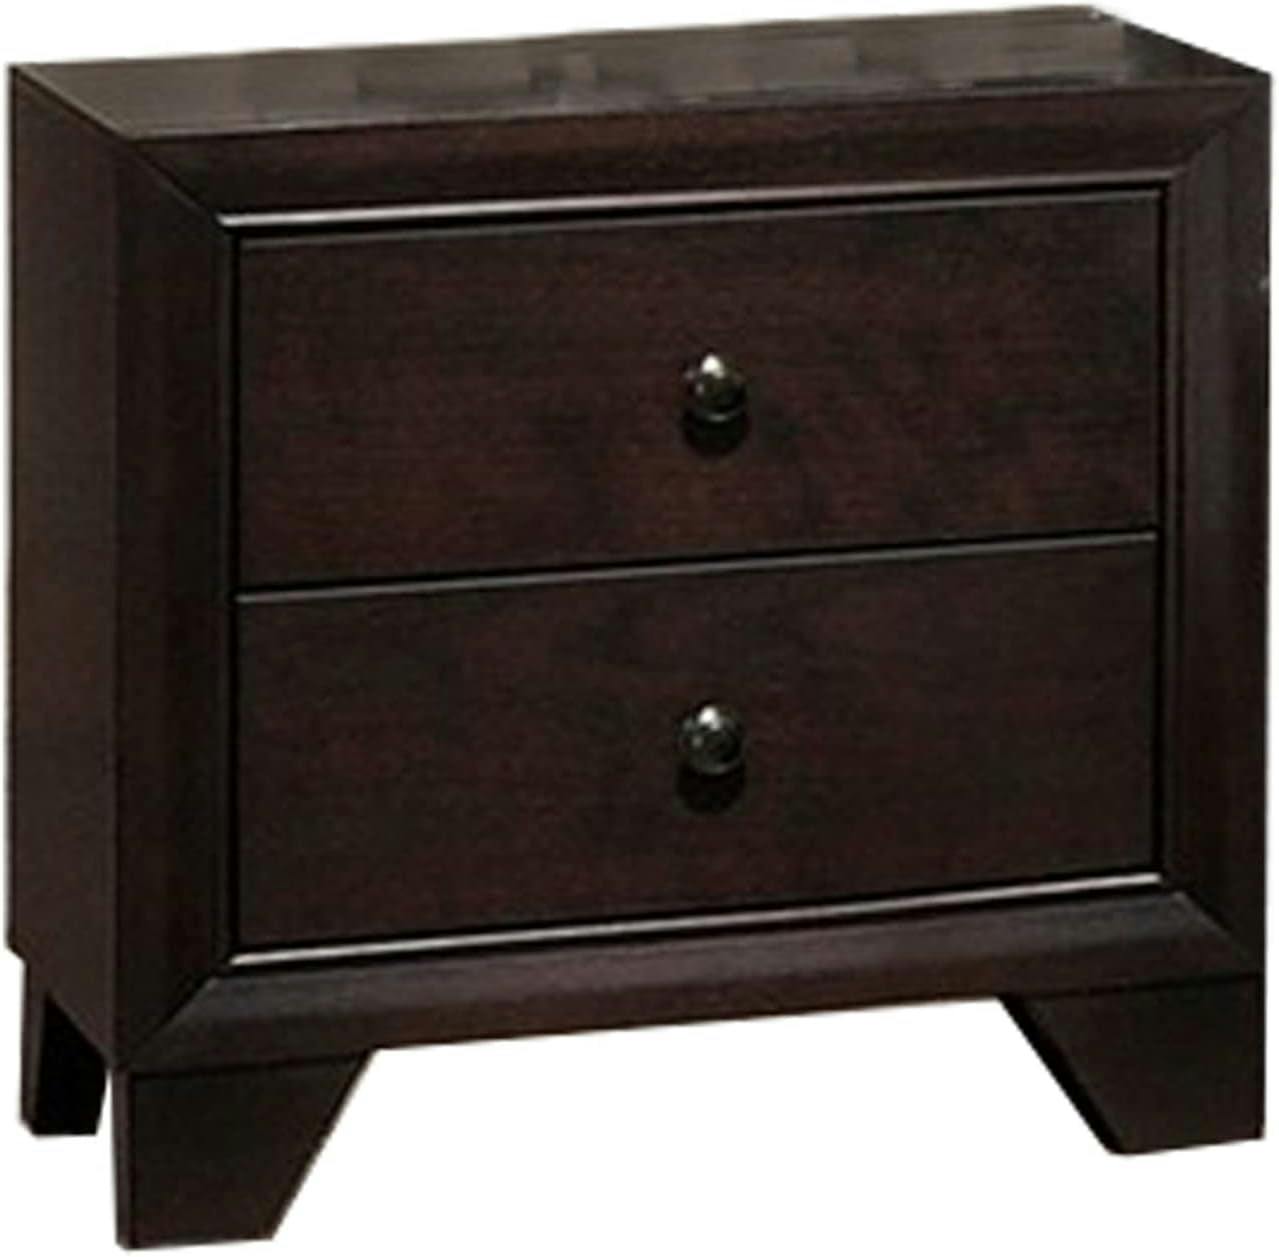 Transitional Brown Wooden Nightstand with Chamfered Legs and Spacious Drawers